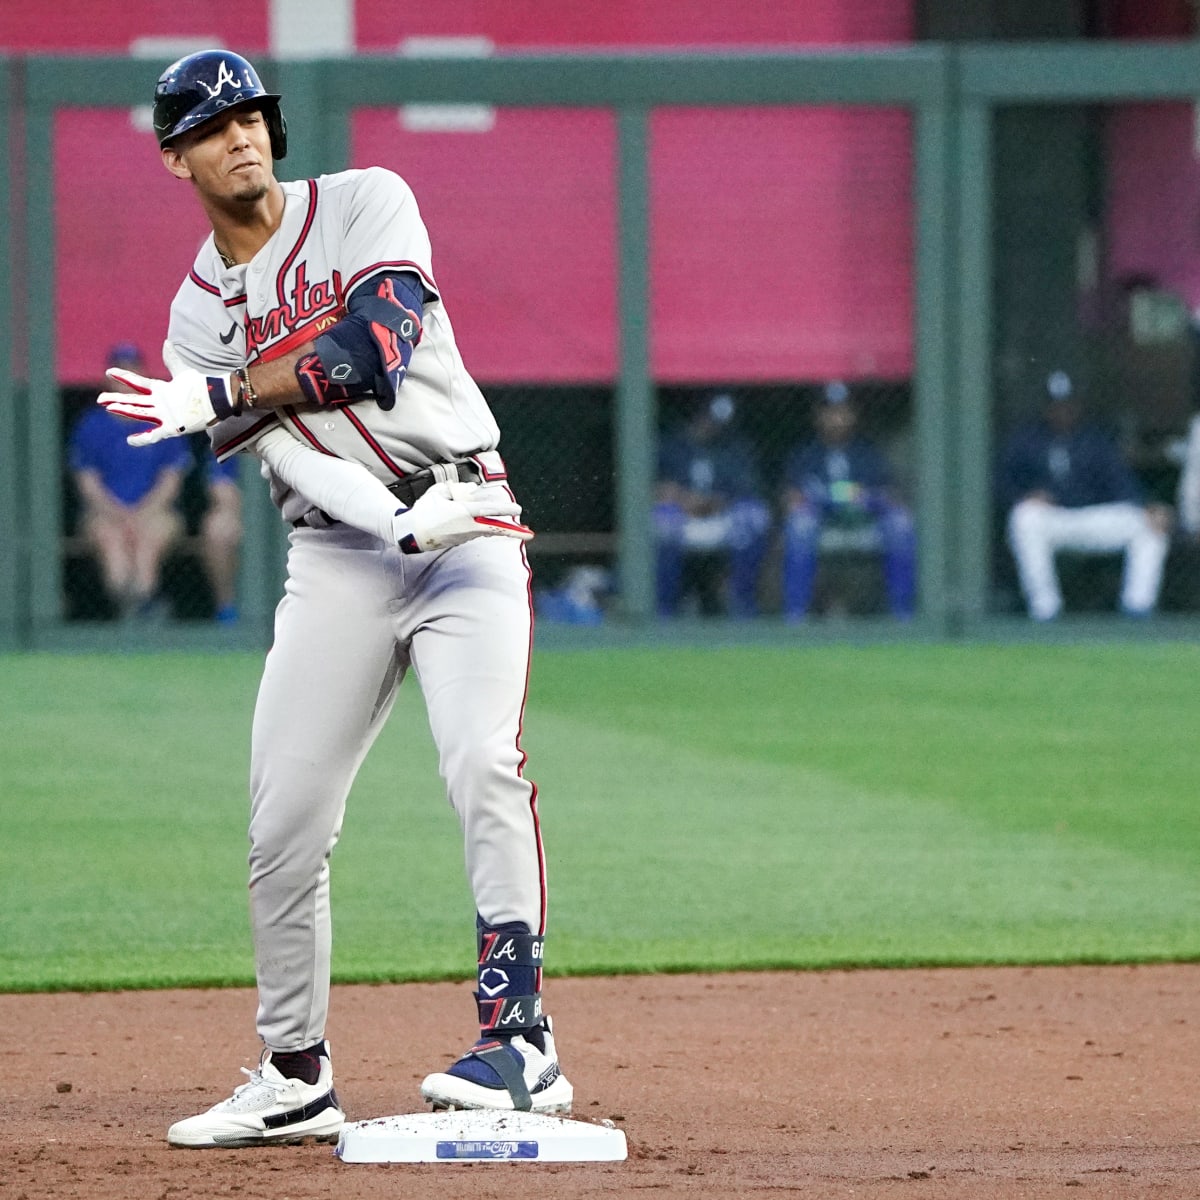 Braves to place Orlando Arcia on IL with microfracture in wrist